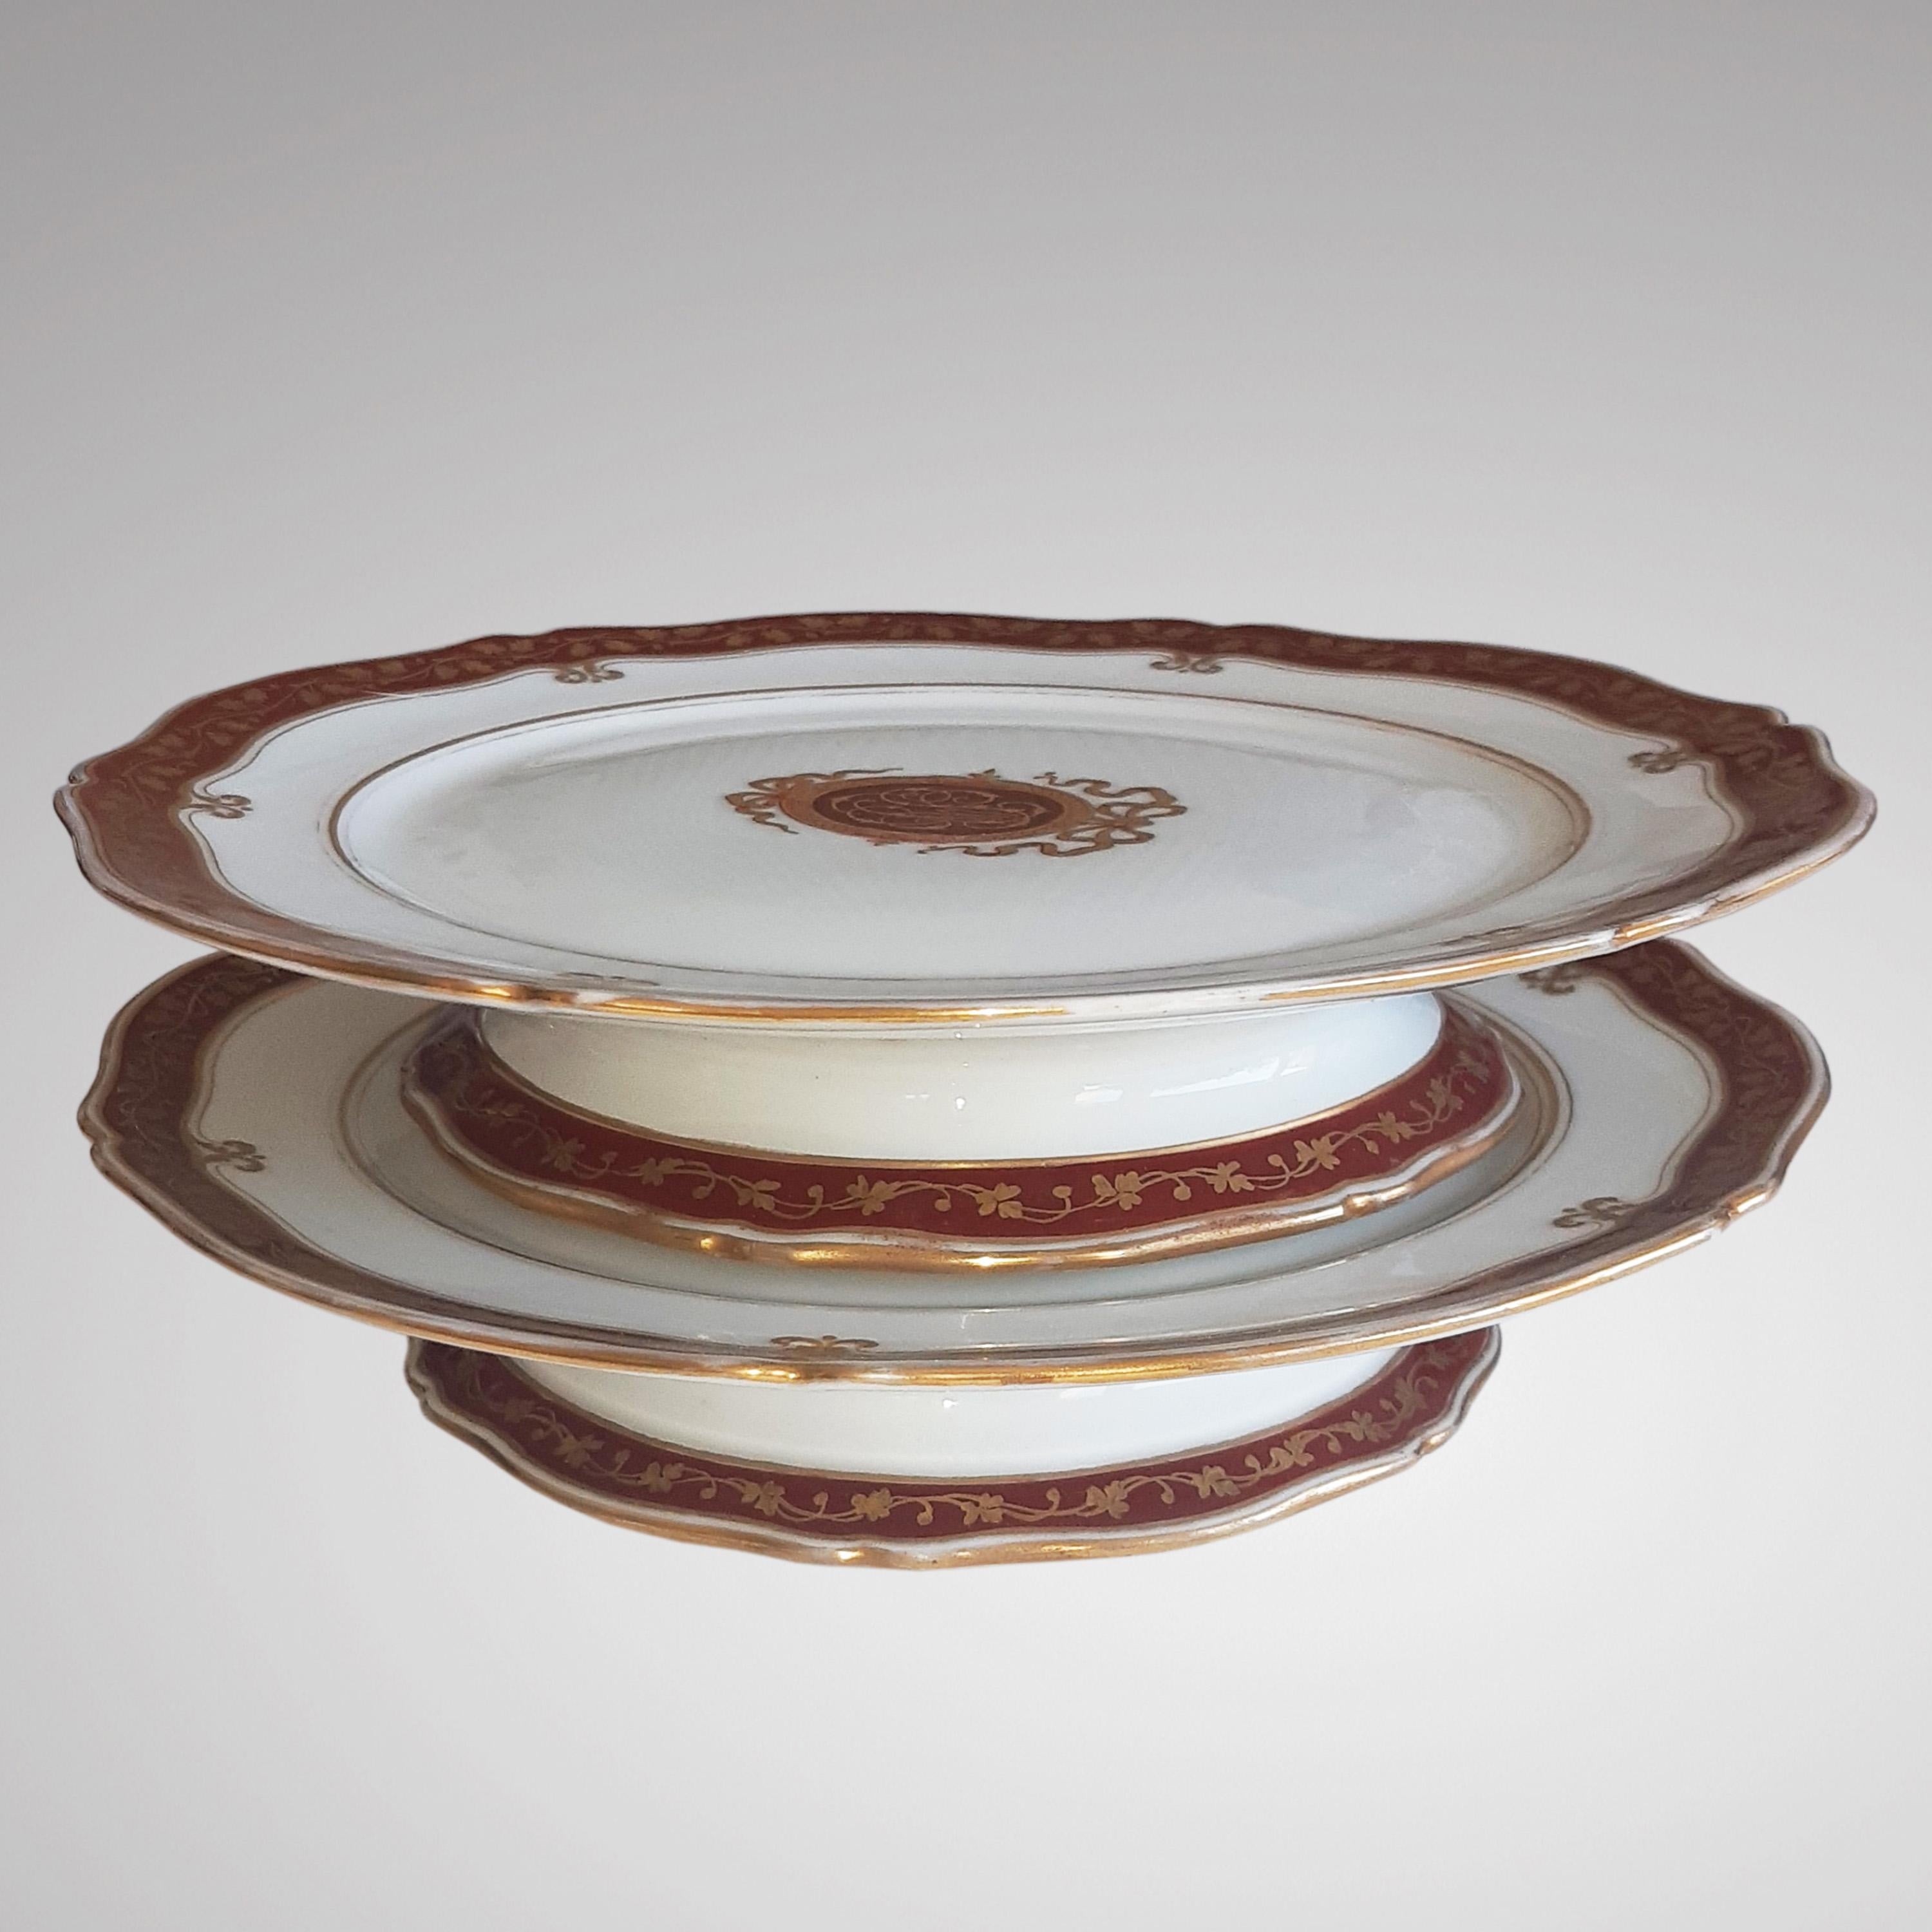 Dessert Service with Red Plates in Paris Porcelain, Napoleon III Period french For Sale 1